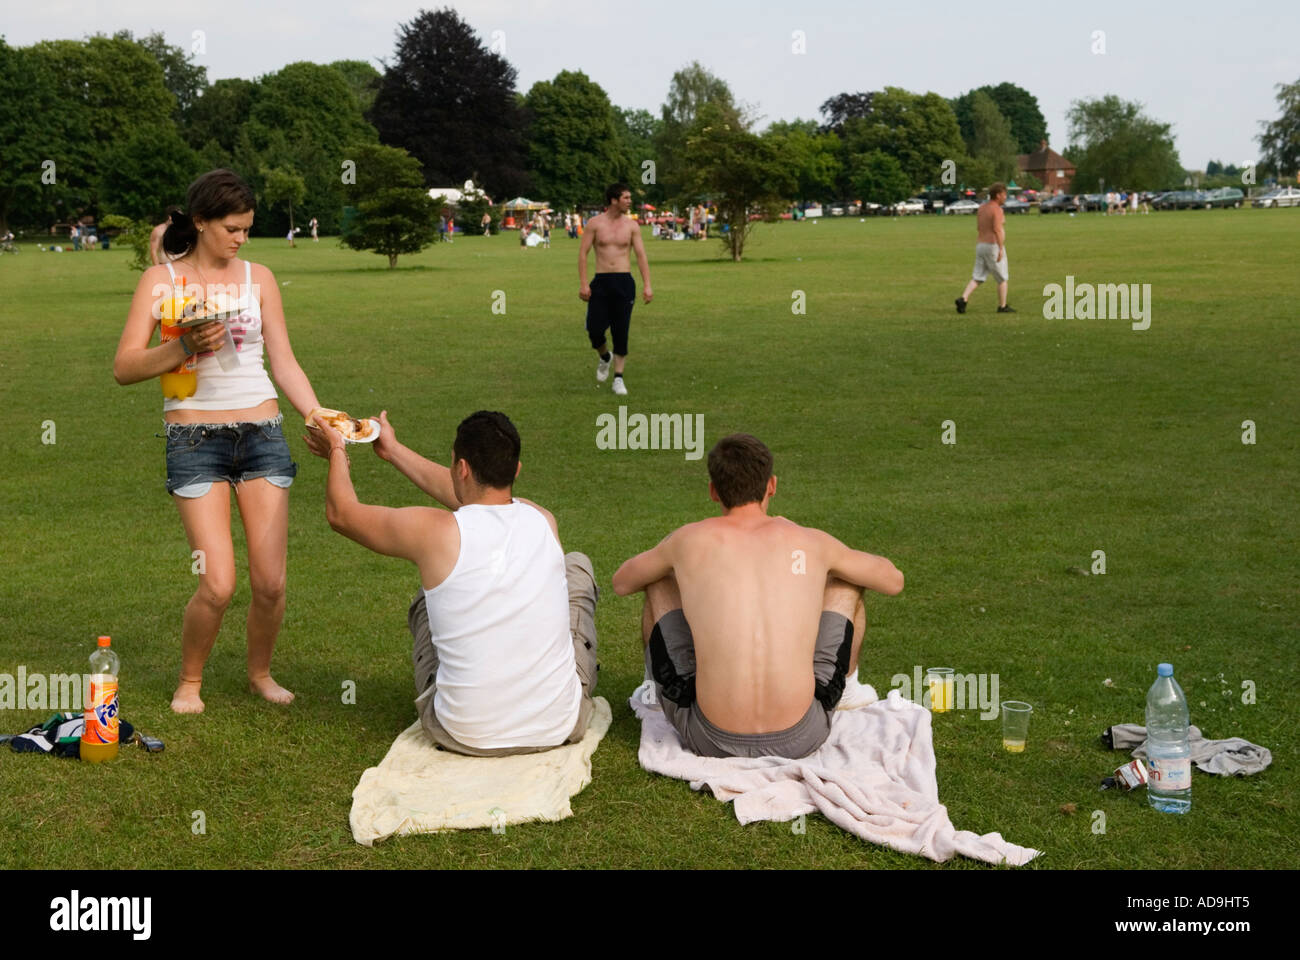 Water Meadow Runnymede. Near Windsor Surrey England 2006 2000s UK.  Young people adults Sunday afternoon messing around together. HOMER SYKES Stock Photo